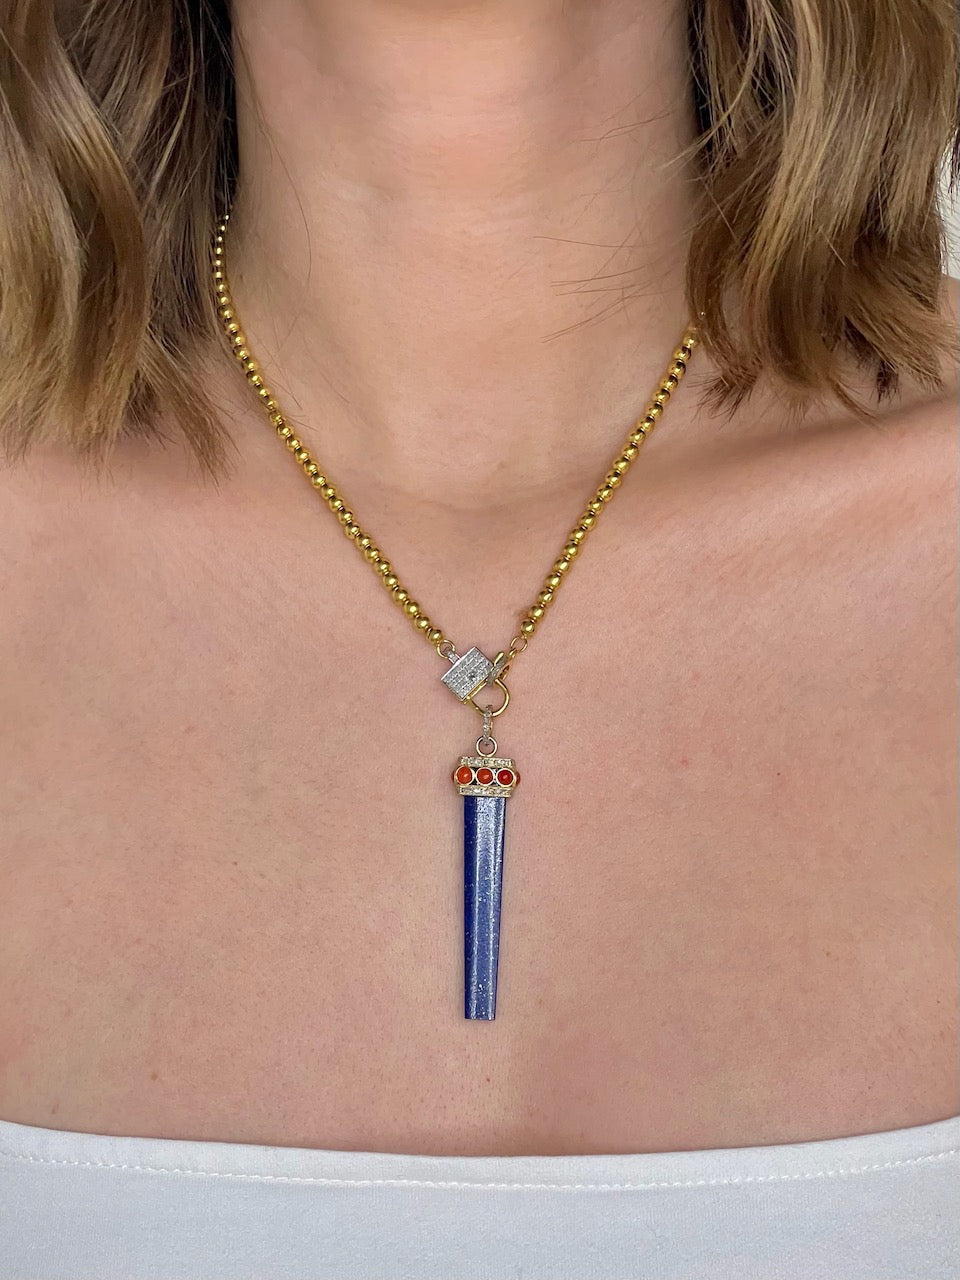 Pave Diamonds and Coral over Lapis